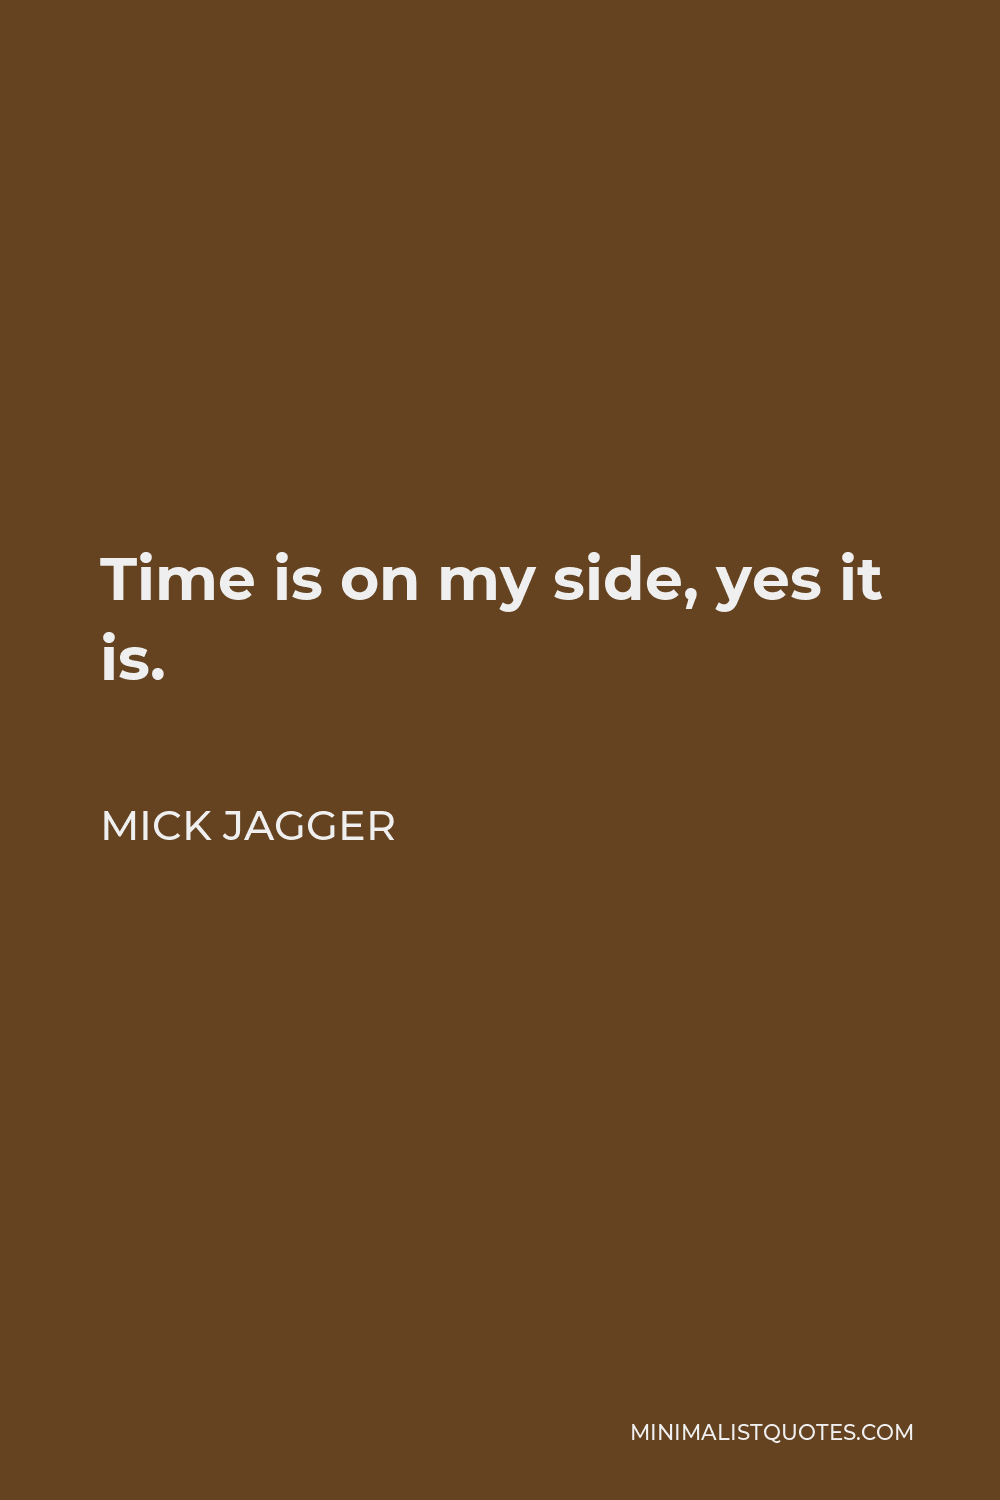 Mick Jagger Quote - Time is on my side, yes it is.